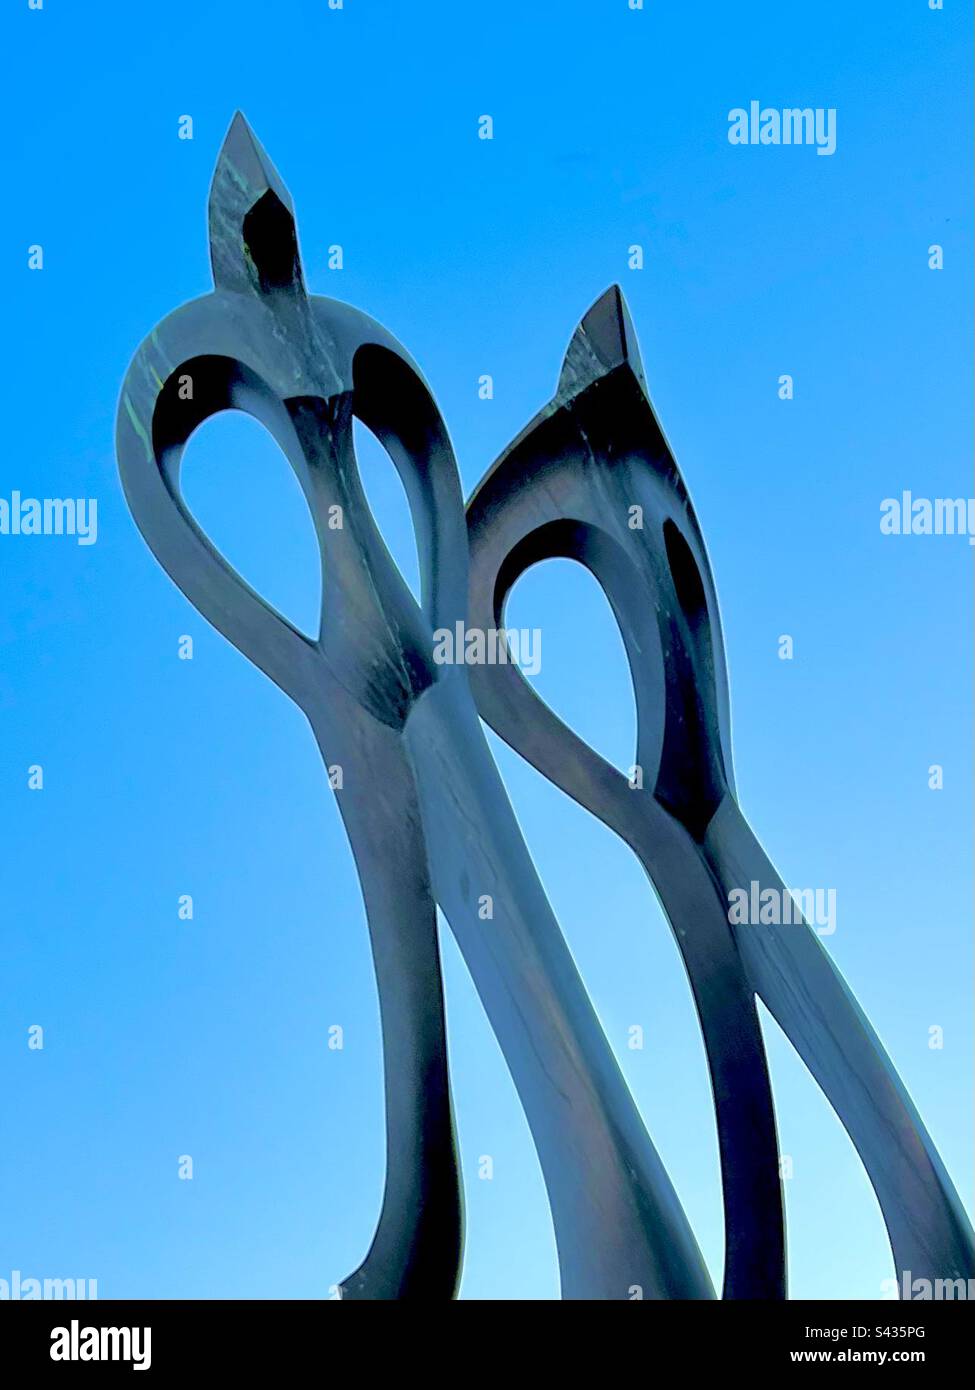 Larger Than Life. Black marble sculpture of two human figures posing proudly in front of clear bright blue sky. Includes print space. Stock Photo